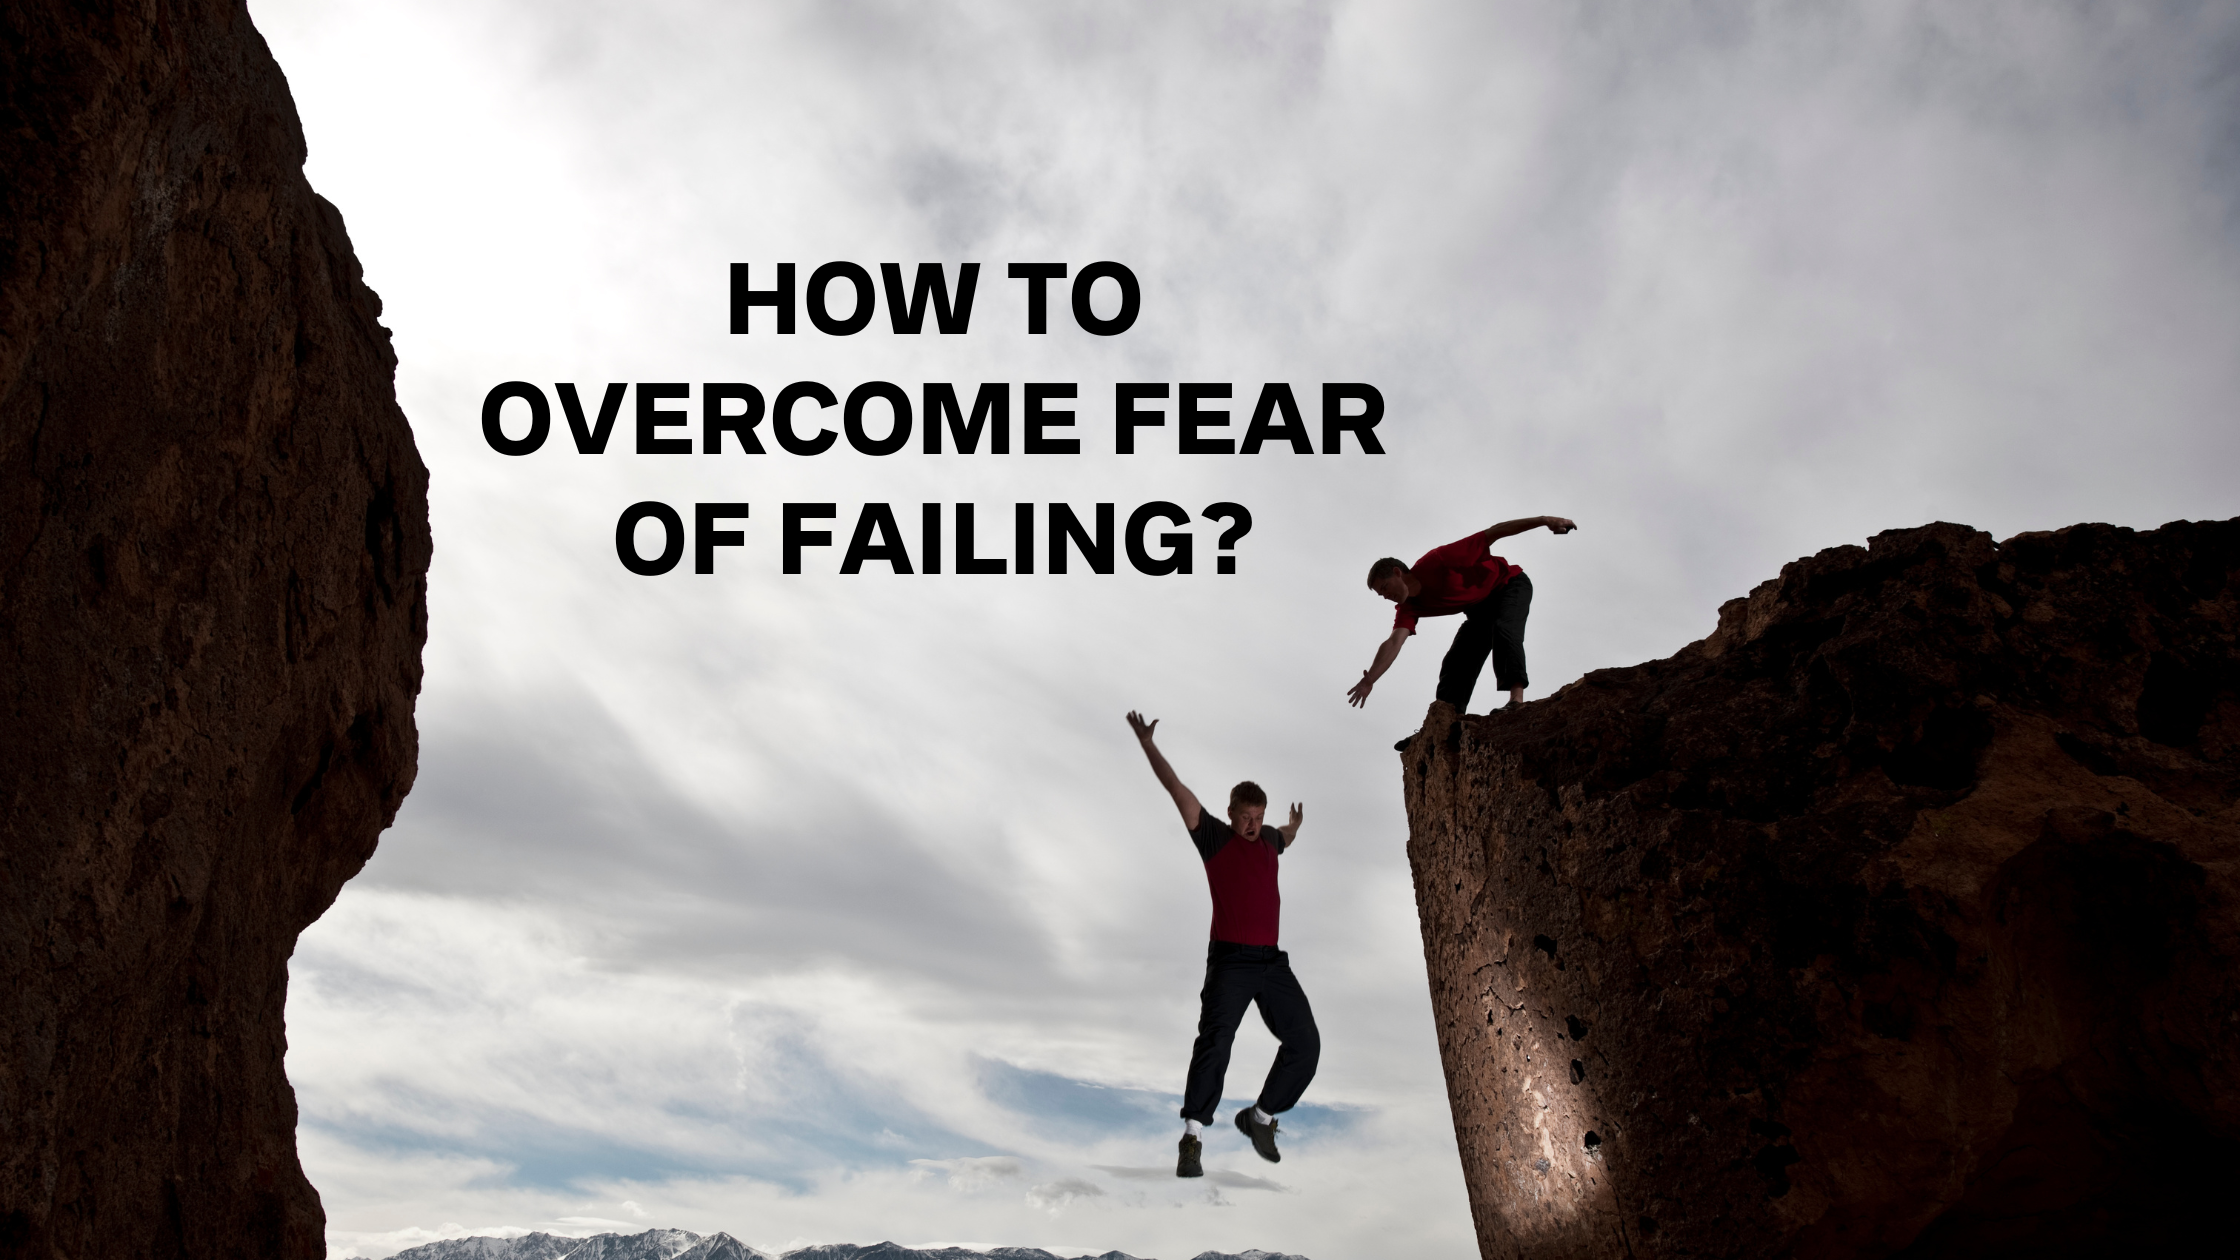 How to Overcome Fear of Failing